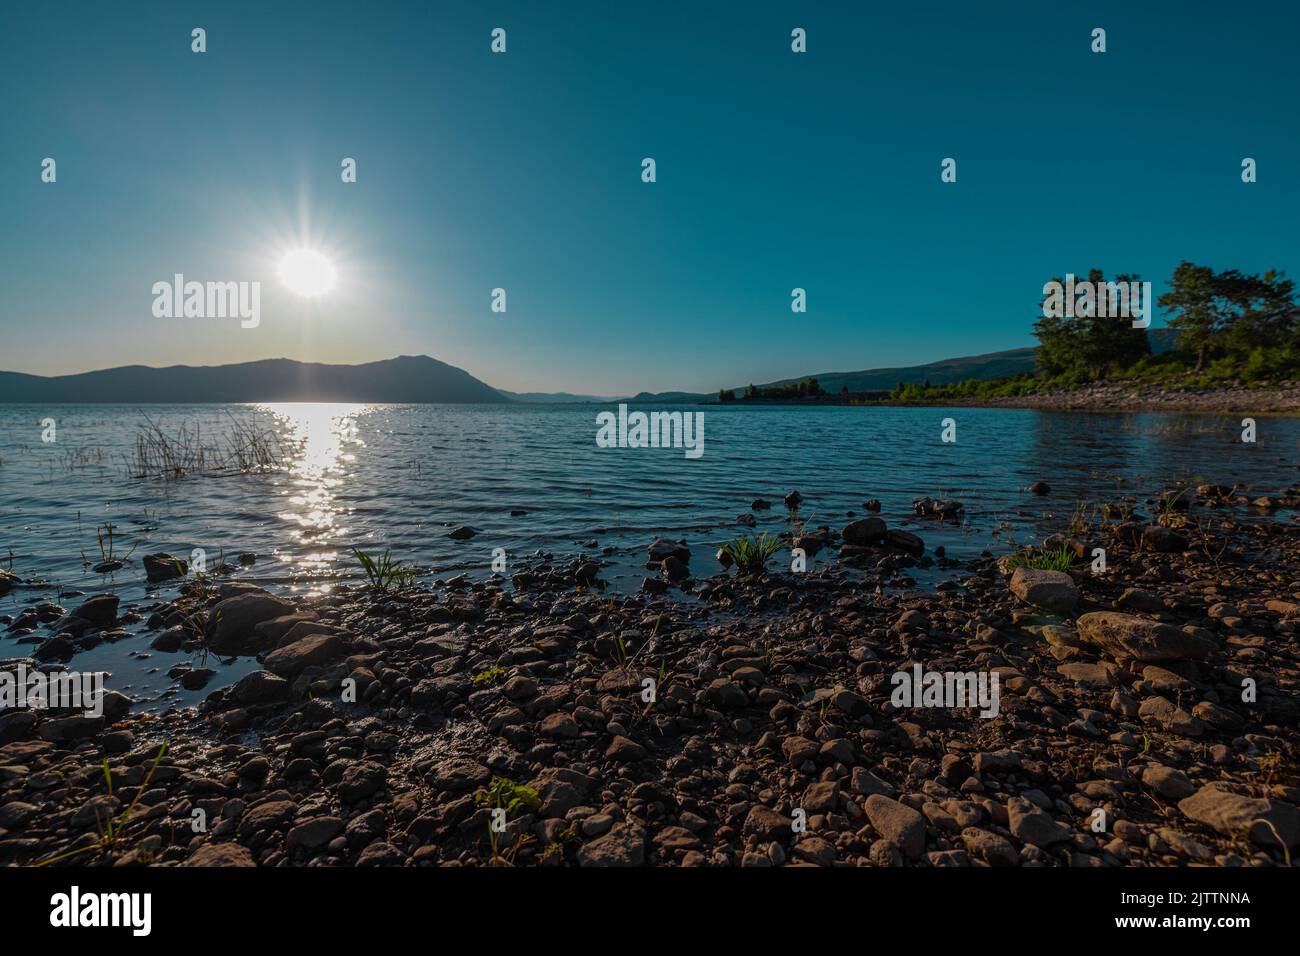 Busko jezero or lake in western bosnia, biggest lake in the region in early evening with the sun just about to set. Nice stones, rocks and water. Stock Photo